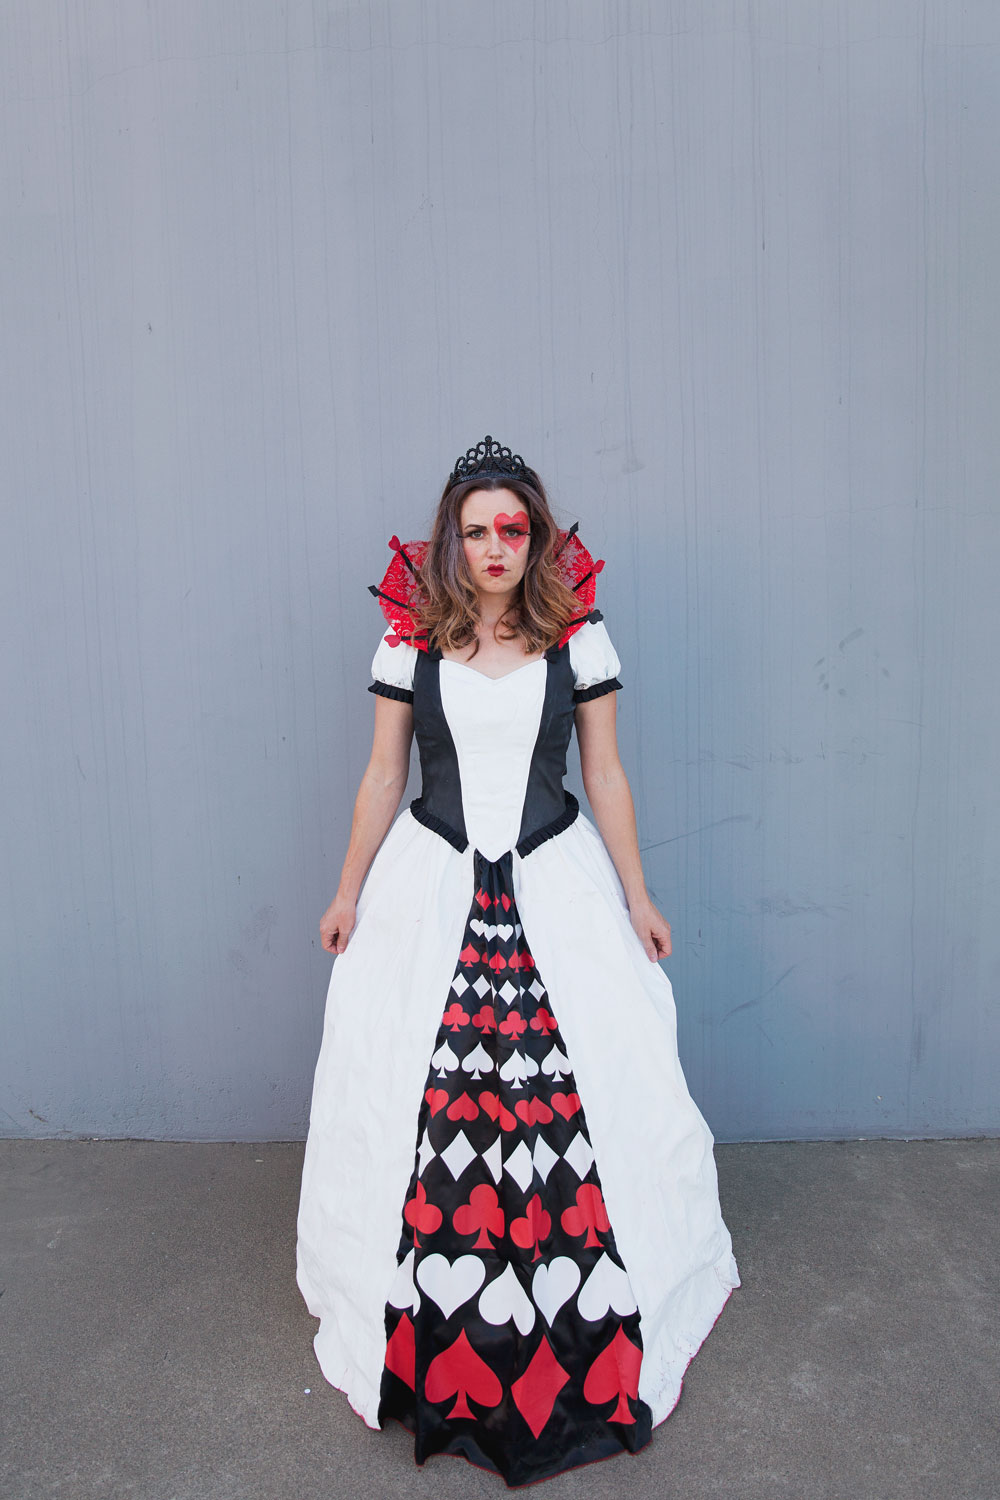 This Queen of Hearts family costume idea is sure to be a hit this Halloween. Learn how to create your own! #halloweencostumes #familyhalloweencostumes #queenofhearts #familycostumeideas